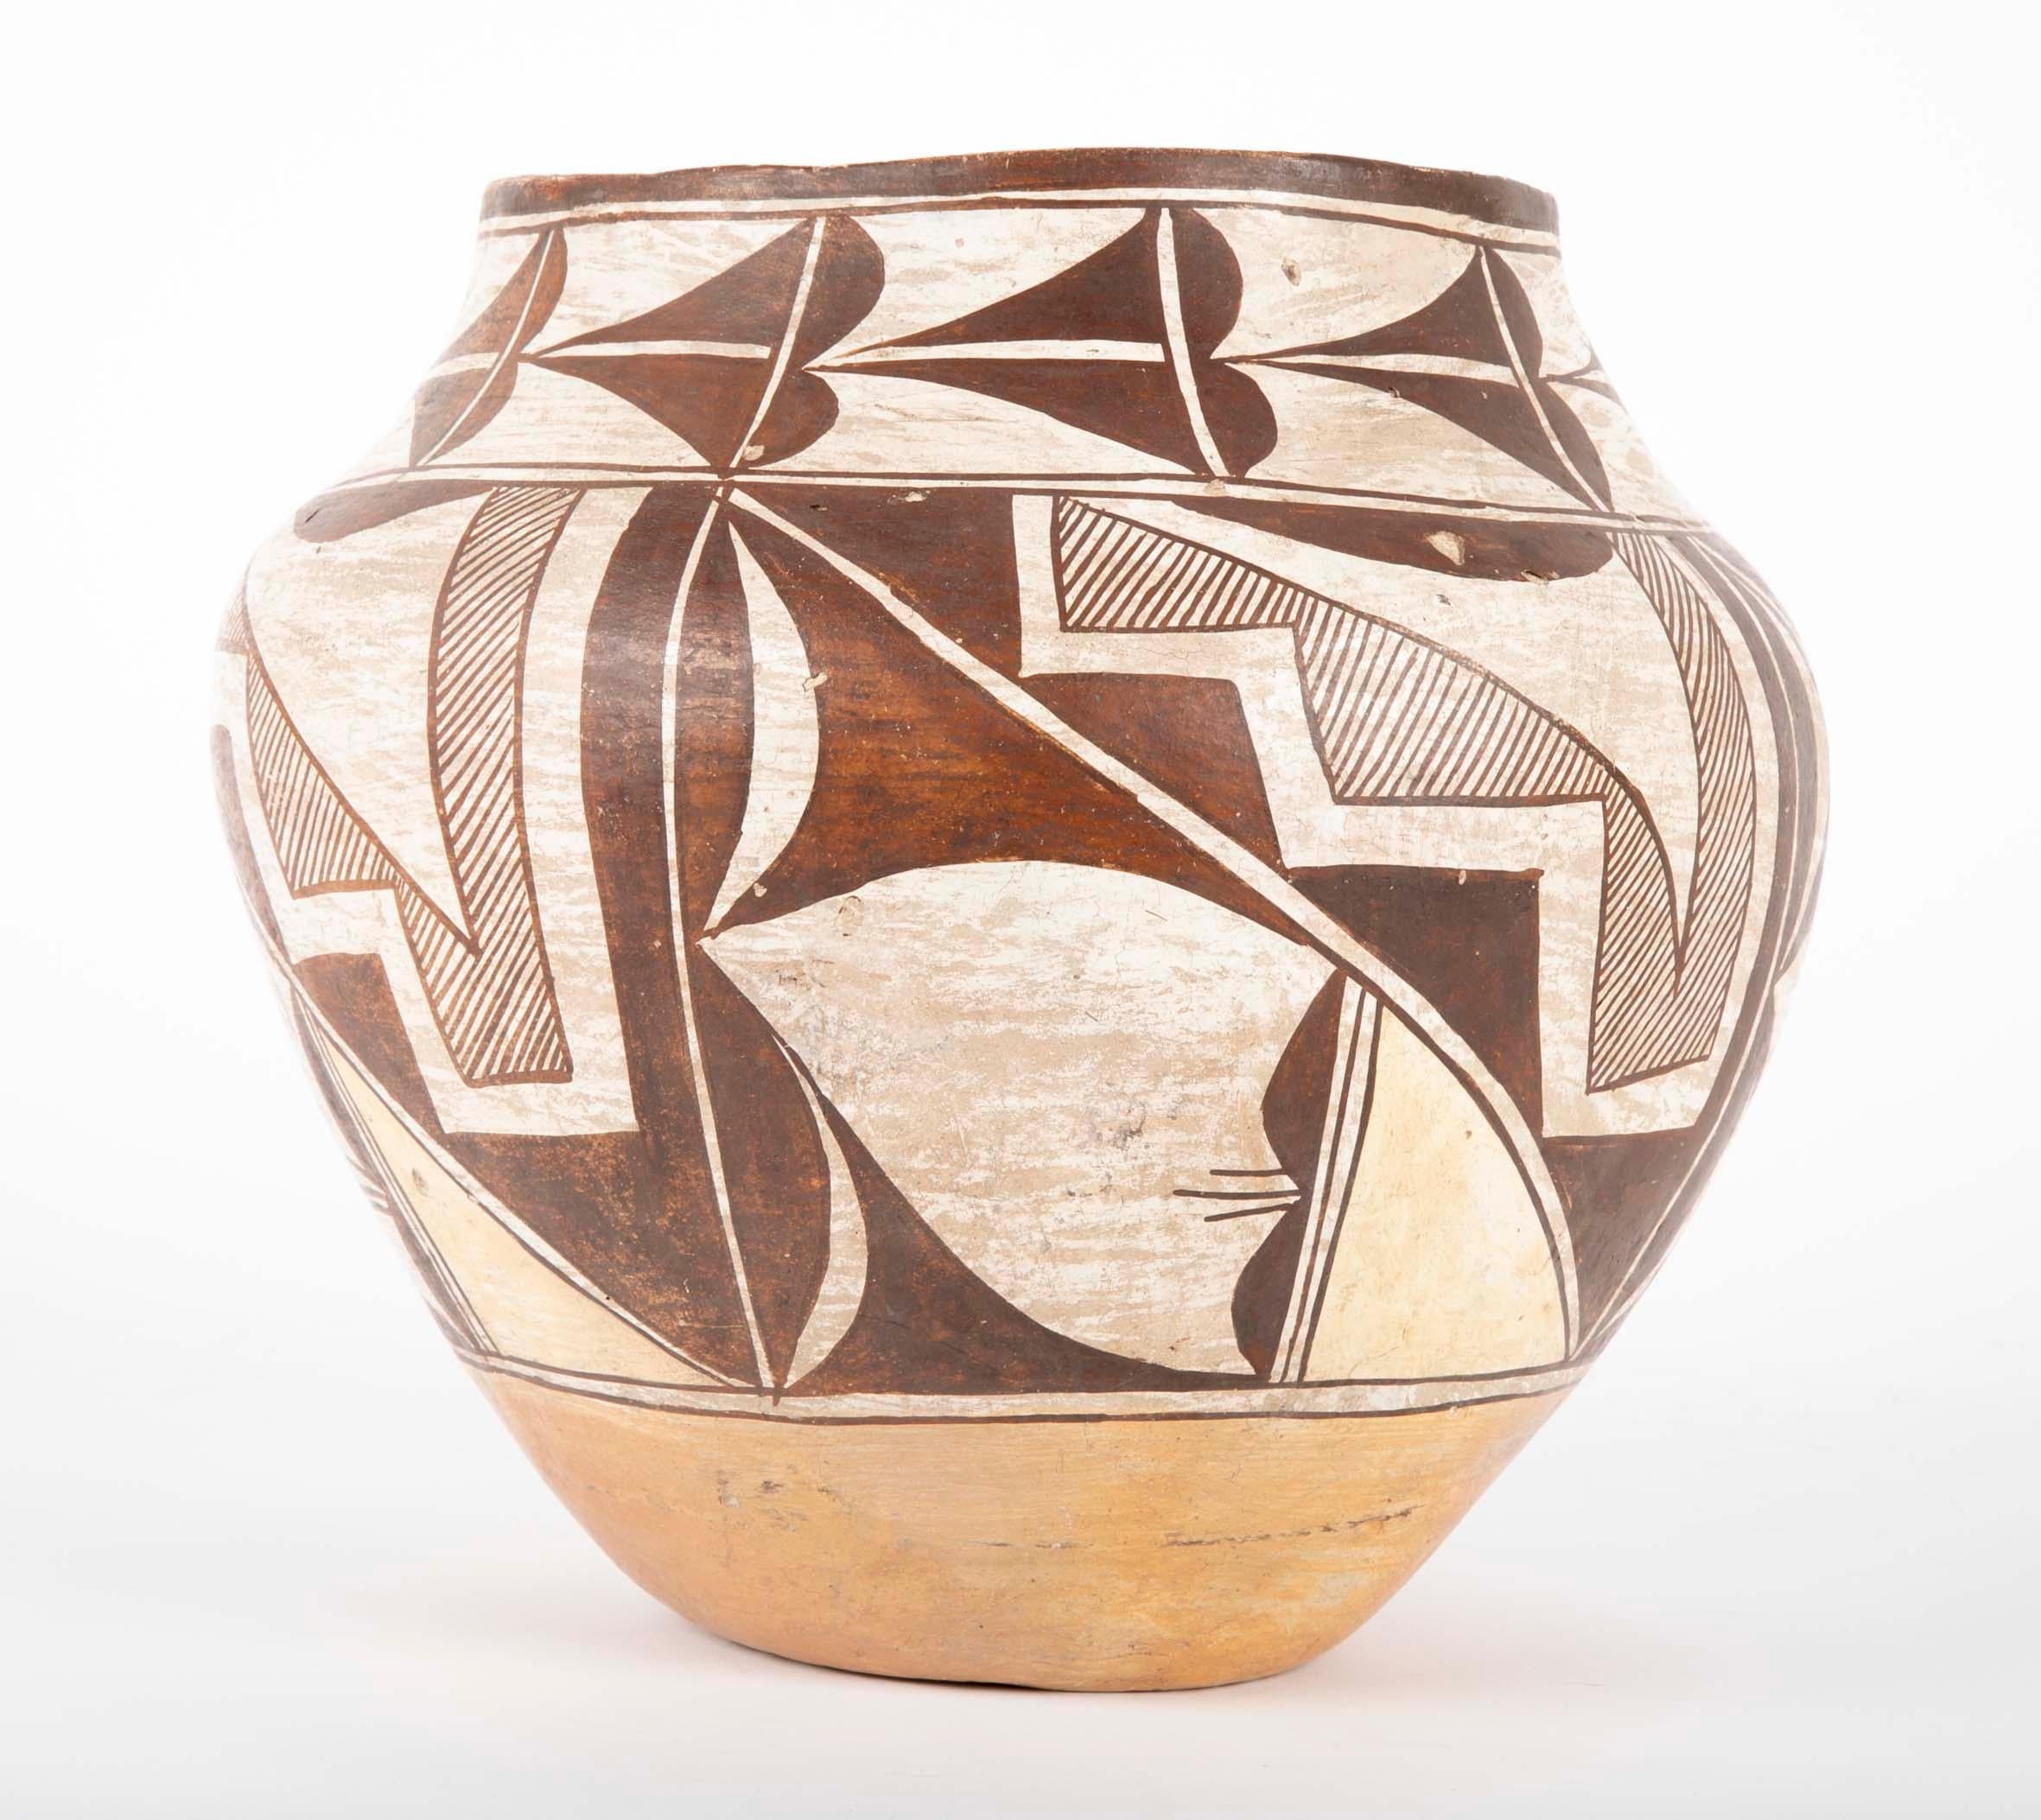 Native American An Acoma Ceramic Vase from the Second Quarter of the 20th Century